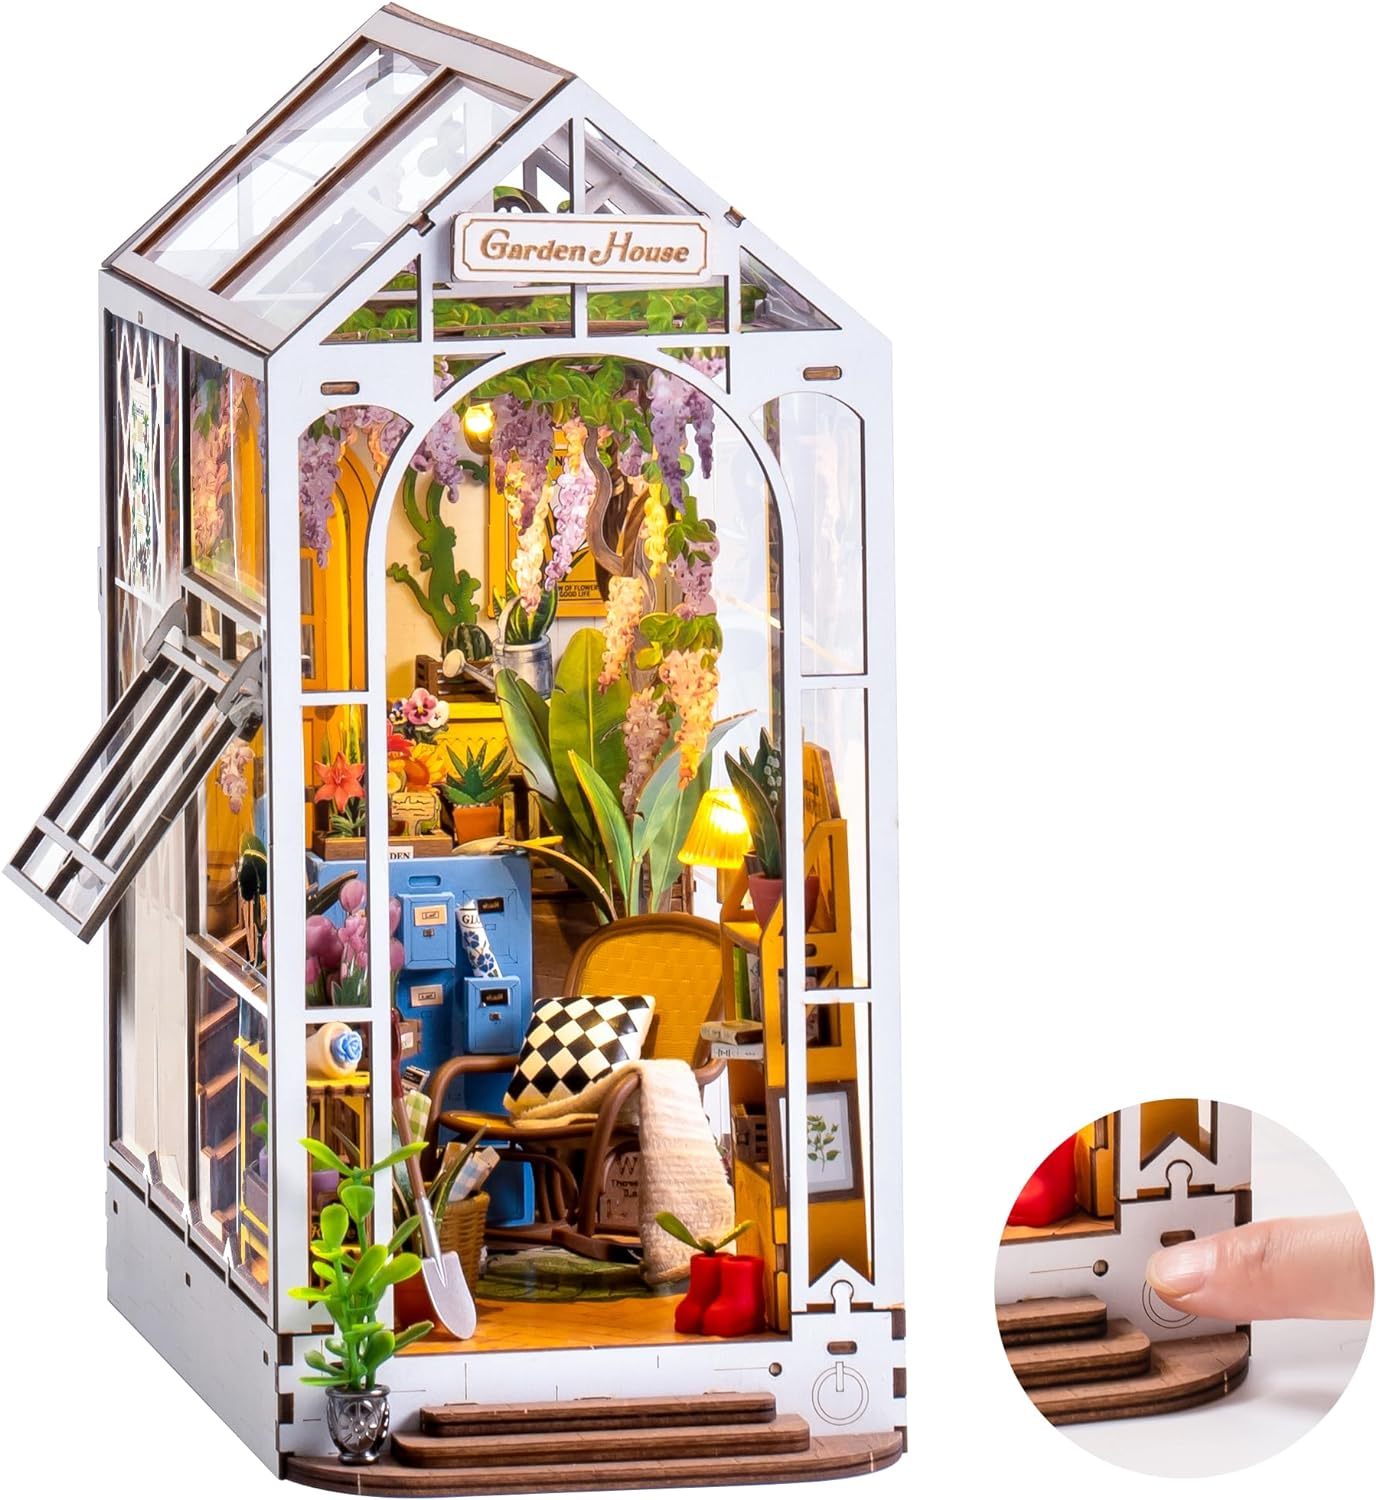 ROBOTIME Book Nook Kit DIY Miniature House with LED Light Booknook Bookshelf Insert Decor Wooden Bookend Craft Hobby Diorama Kit Unique Gifts (Garden House)